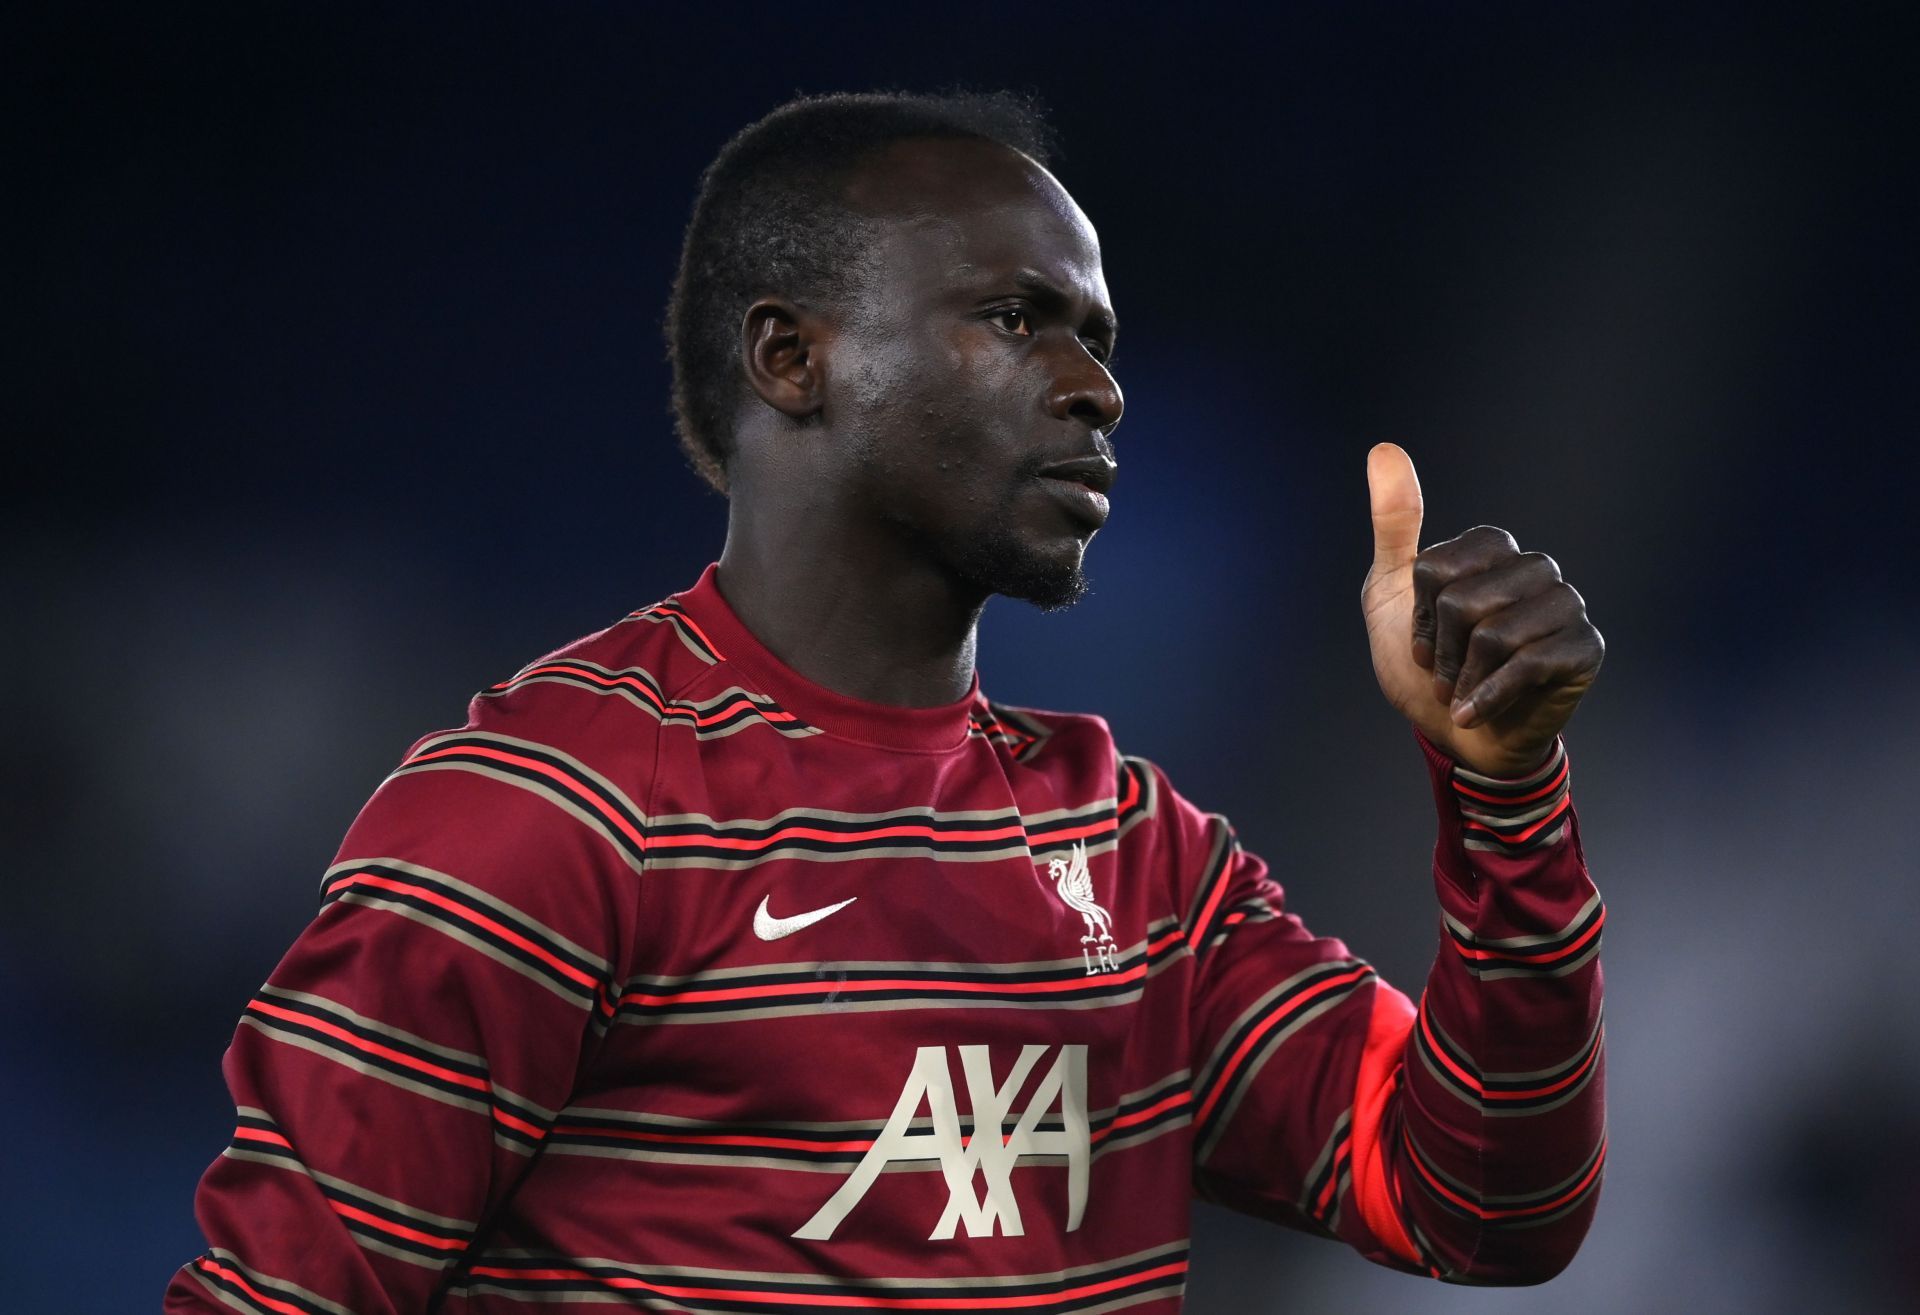 Sadio Mane is willing to join Real Madrid.